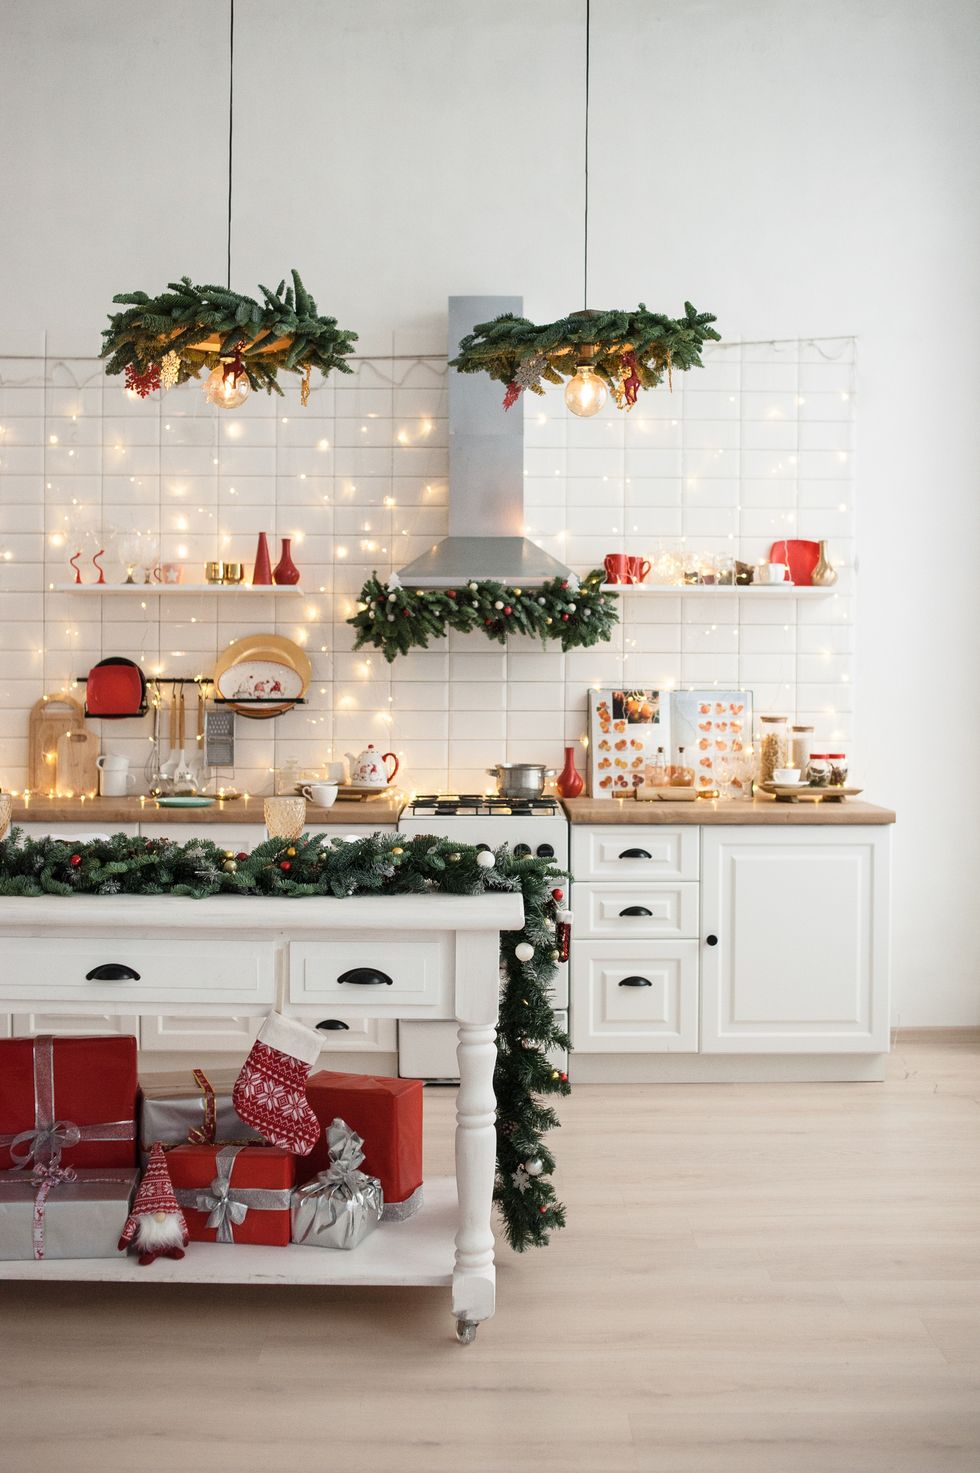 How To Turn Your Kitchen Cabinets Into Christmas Presents - Studio DIY